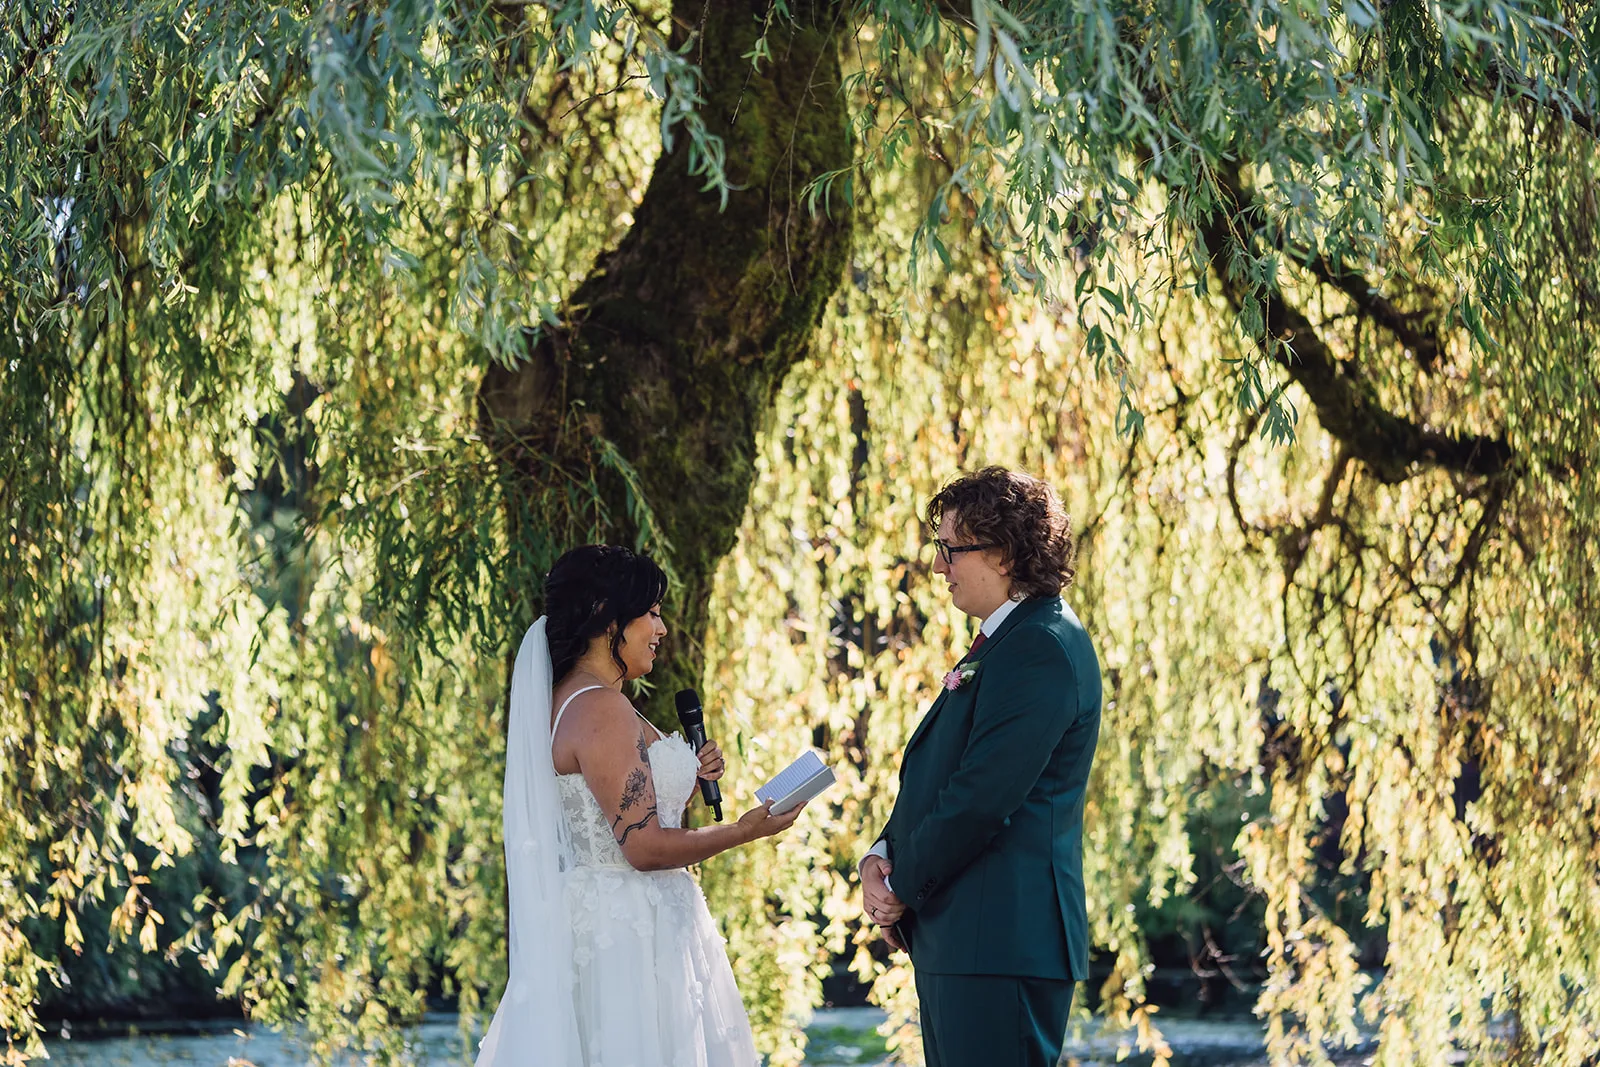 Bride and groom exchanging their vows under a willow tree